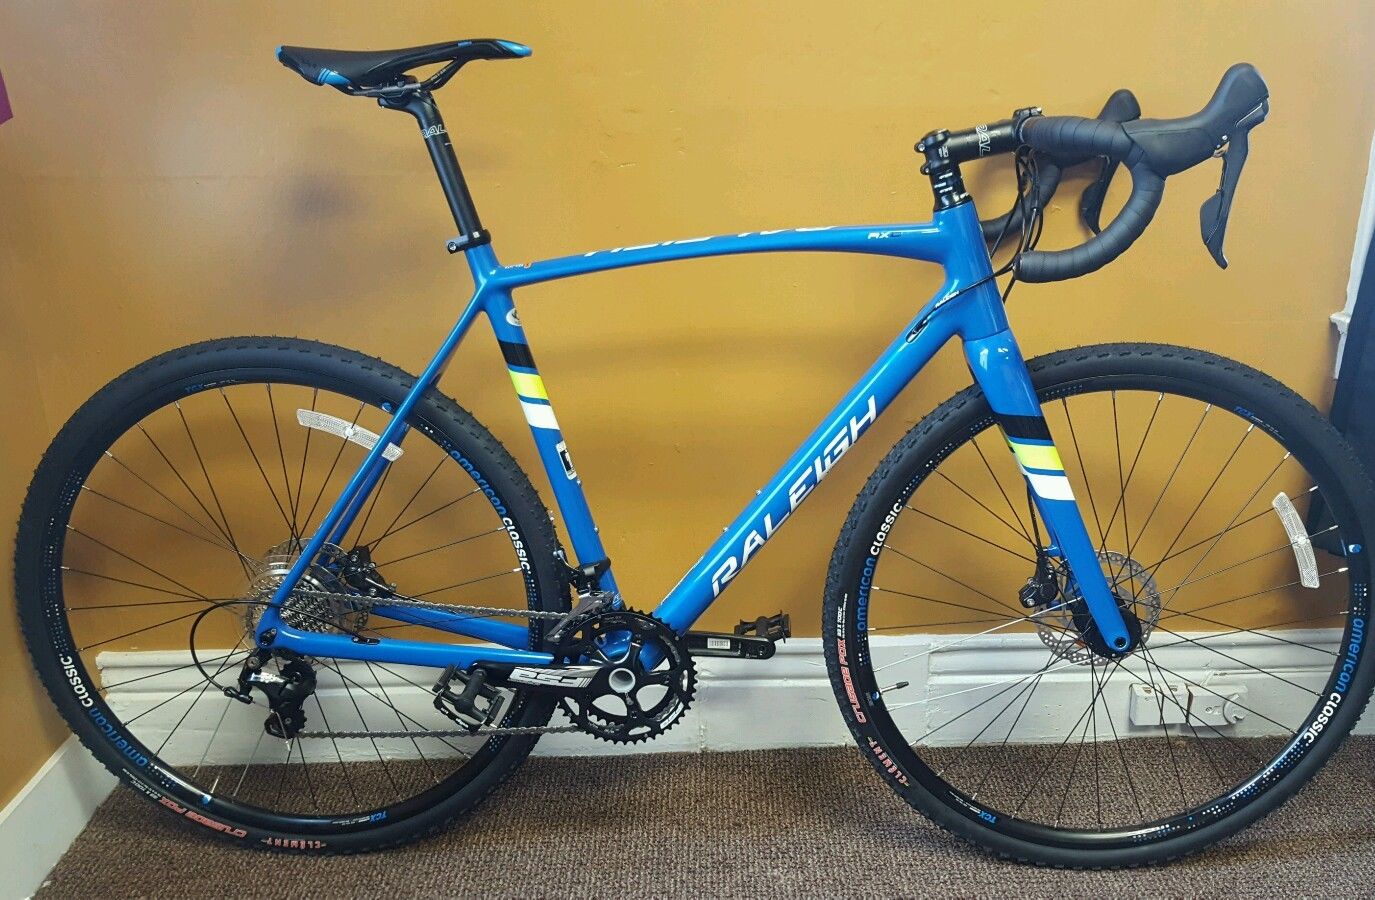 New Raleigh RXC Pro Canti Carbon Cyclocross CX Bike ......$750 USD